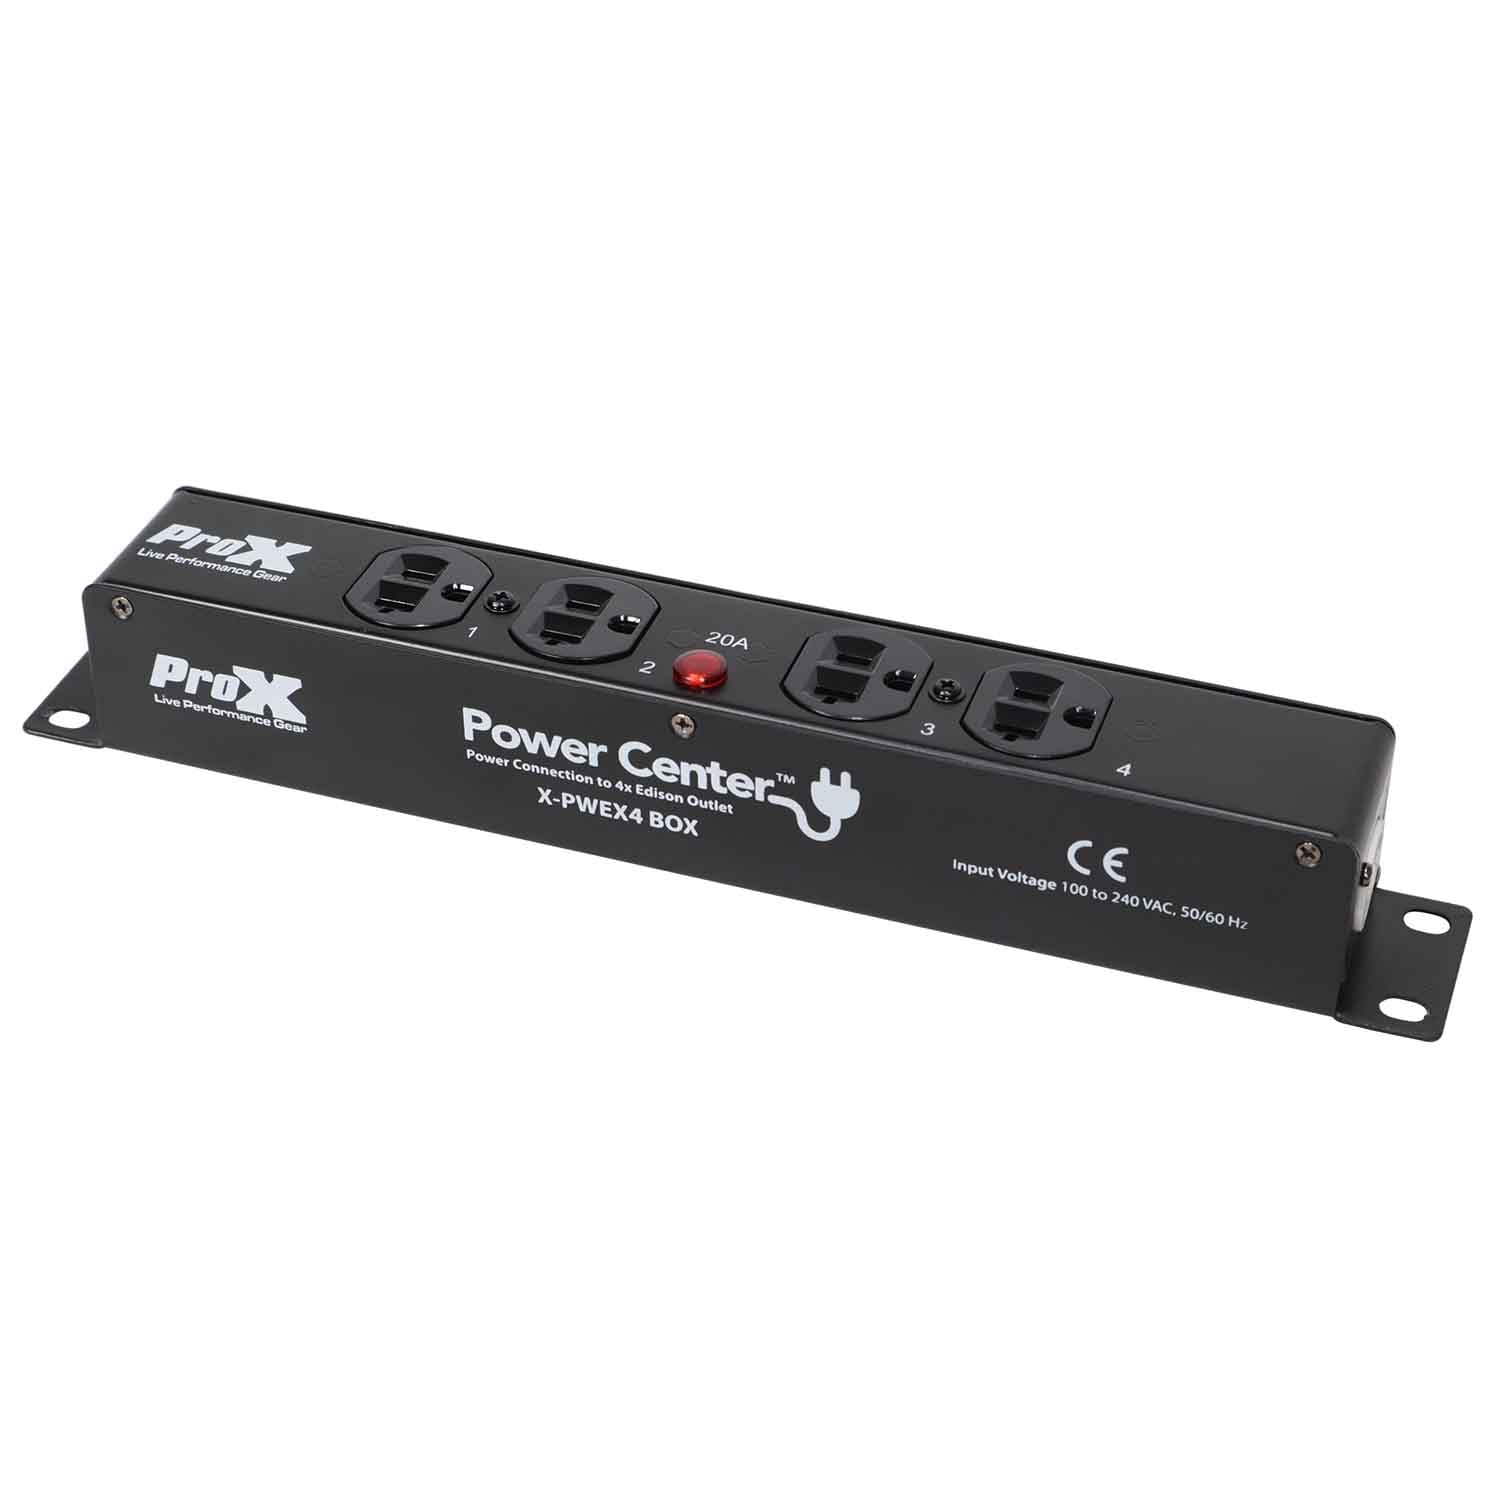 ProX X-PWEX4 BOX Power Center for Indoor Power Connector Compatible to 4X Edison Power Outlet - Hollywood DJ